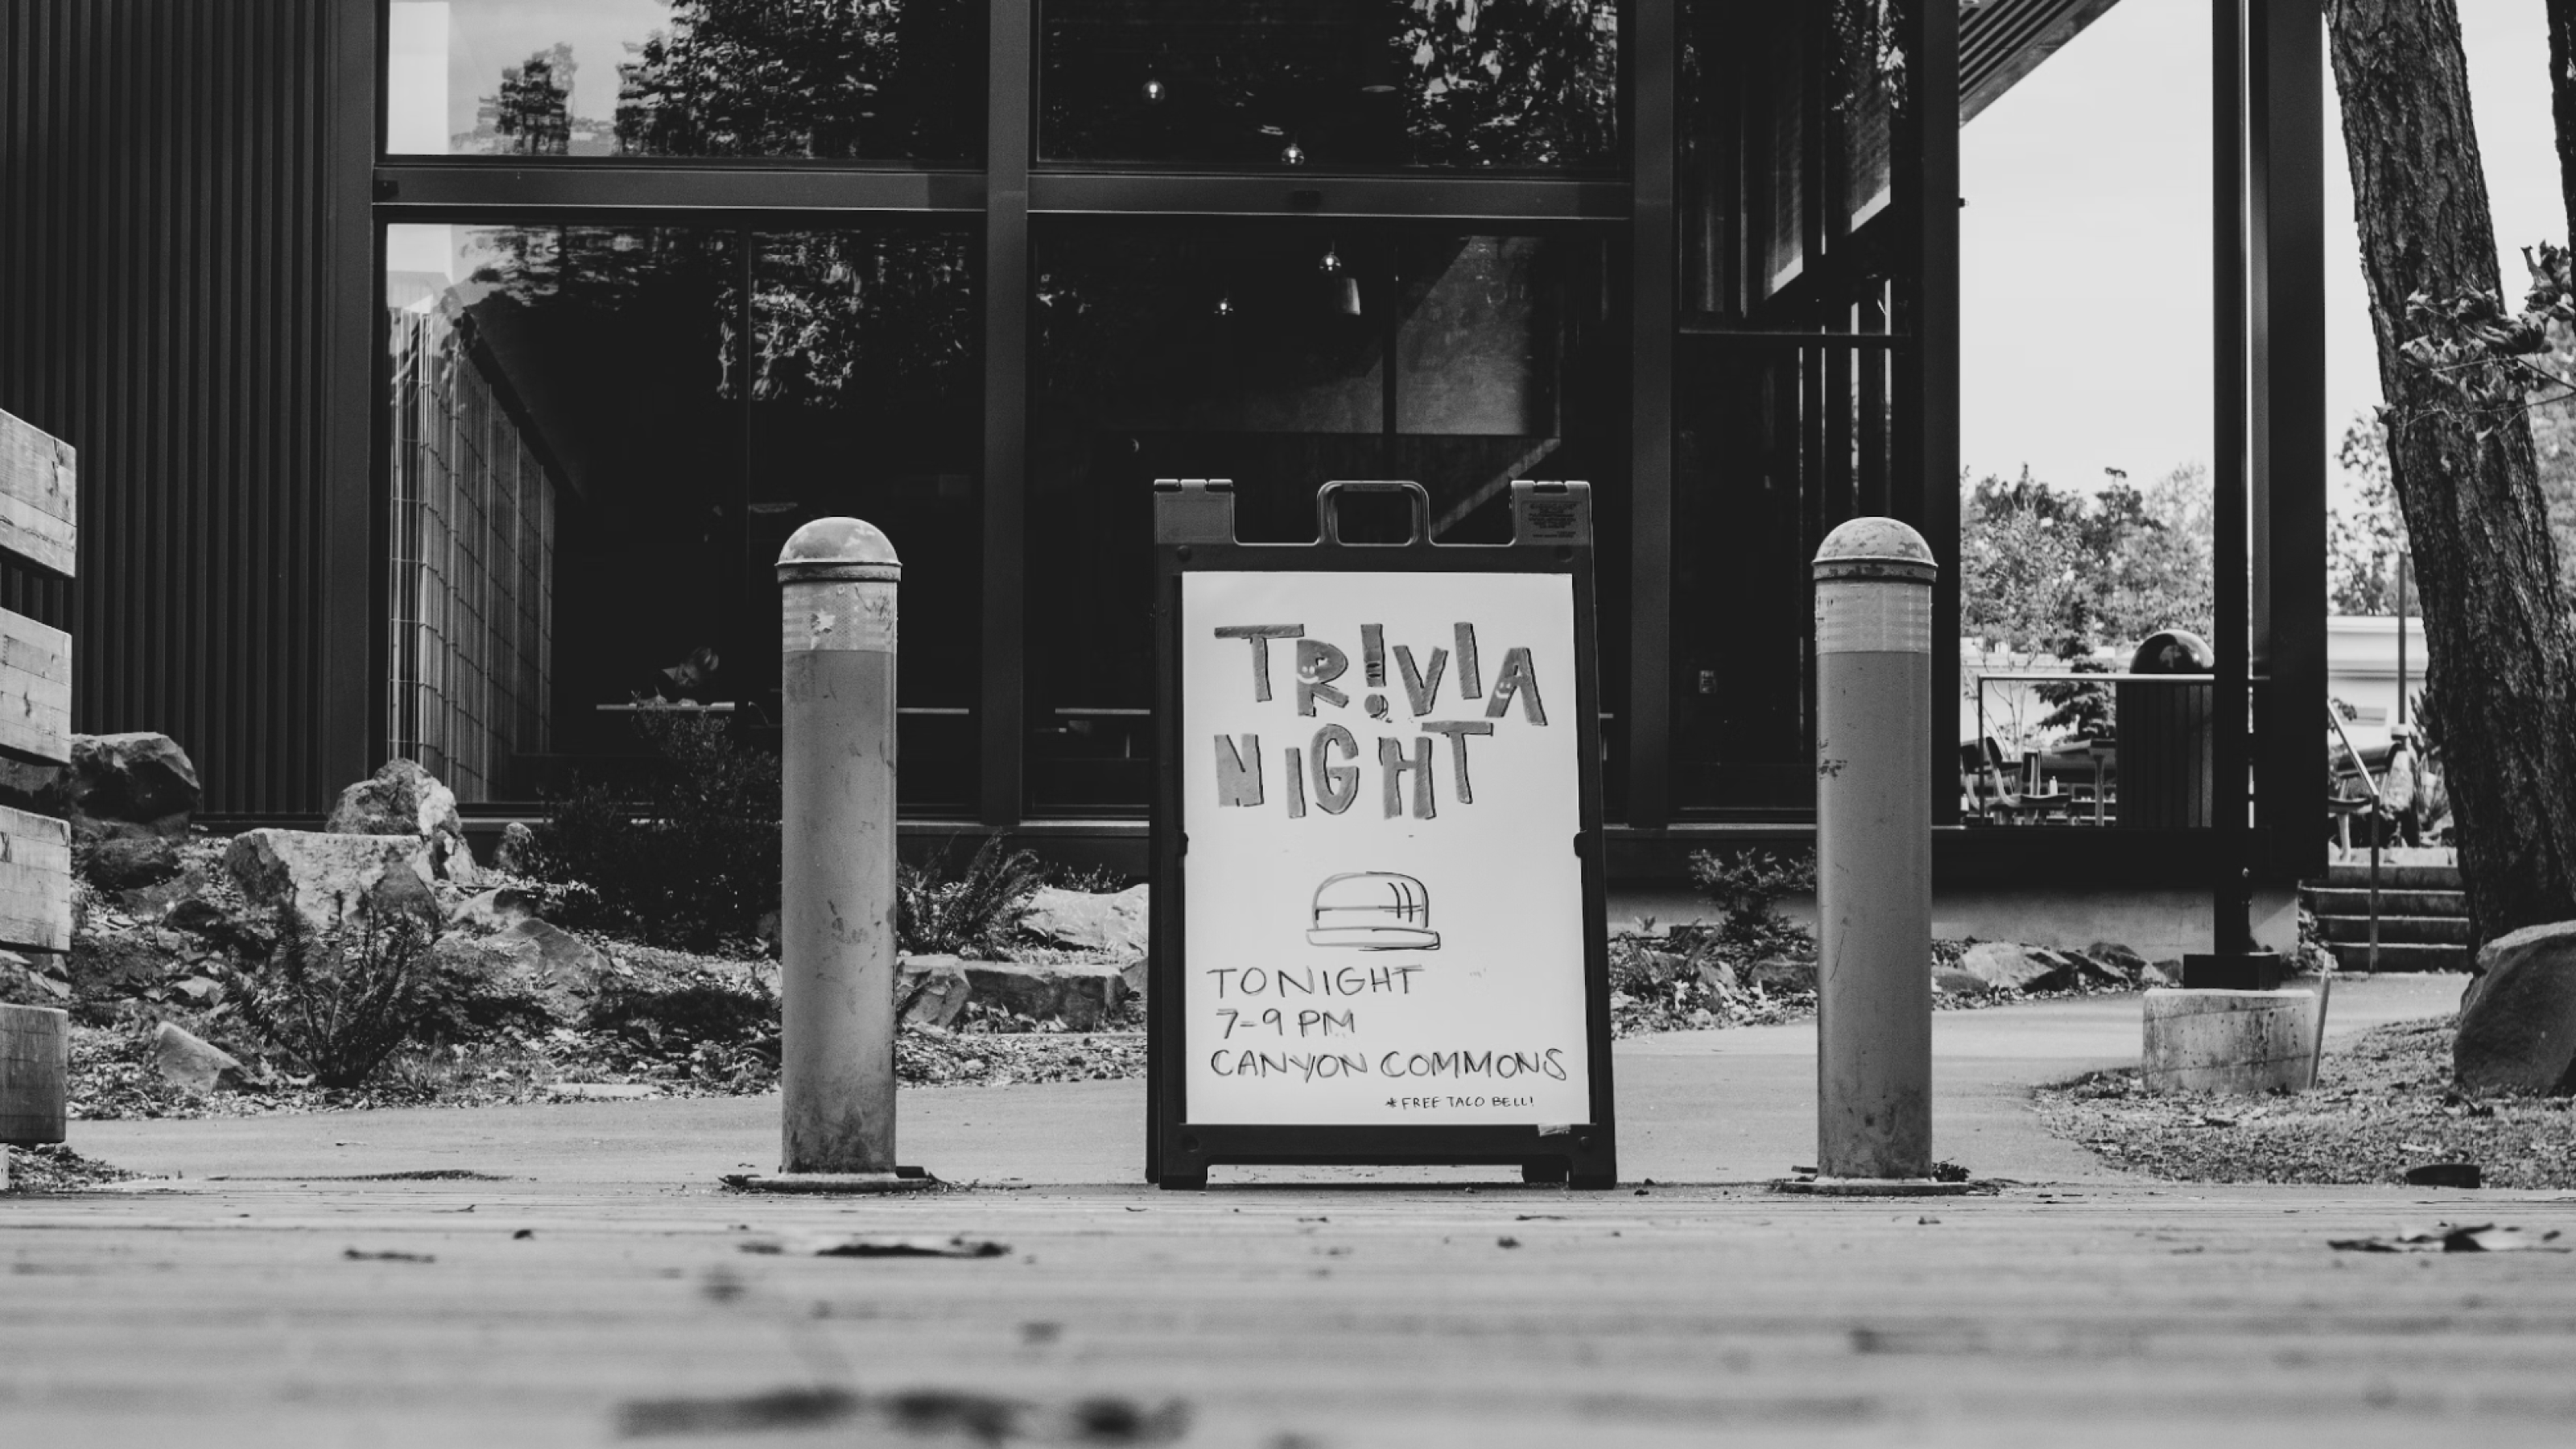 Black and white photo of a sign in the street promoting a trivia night